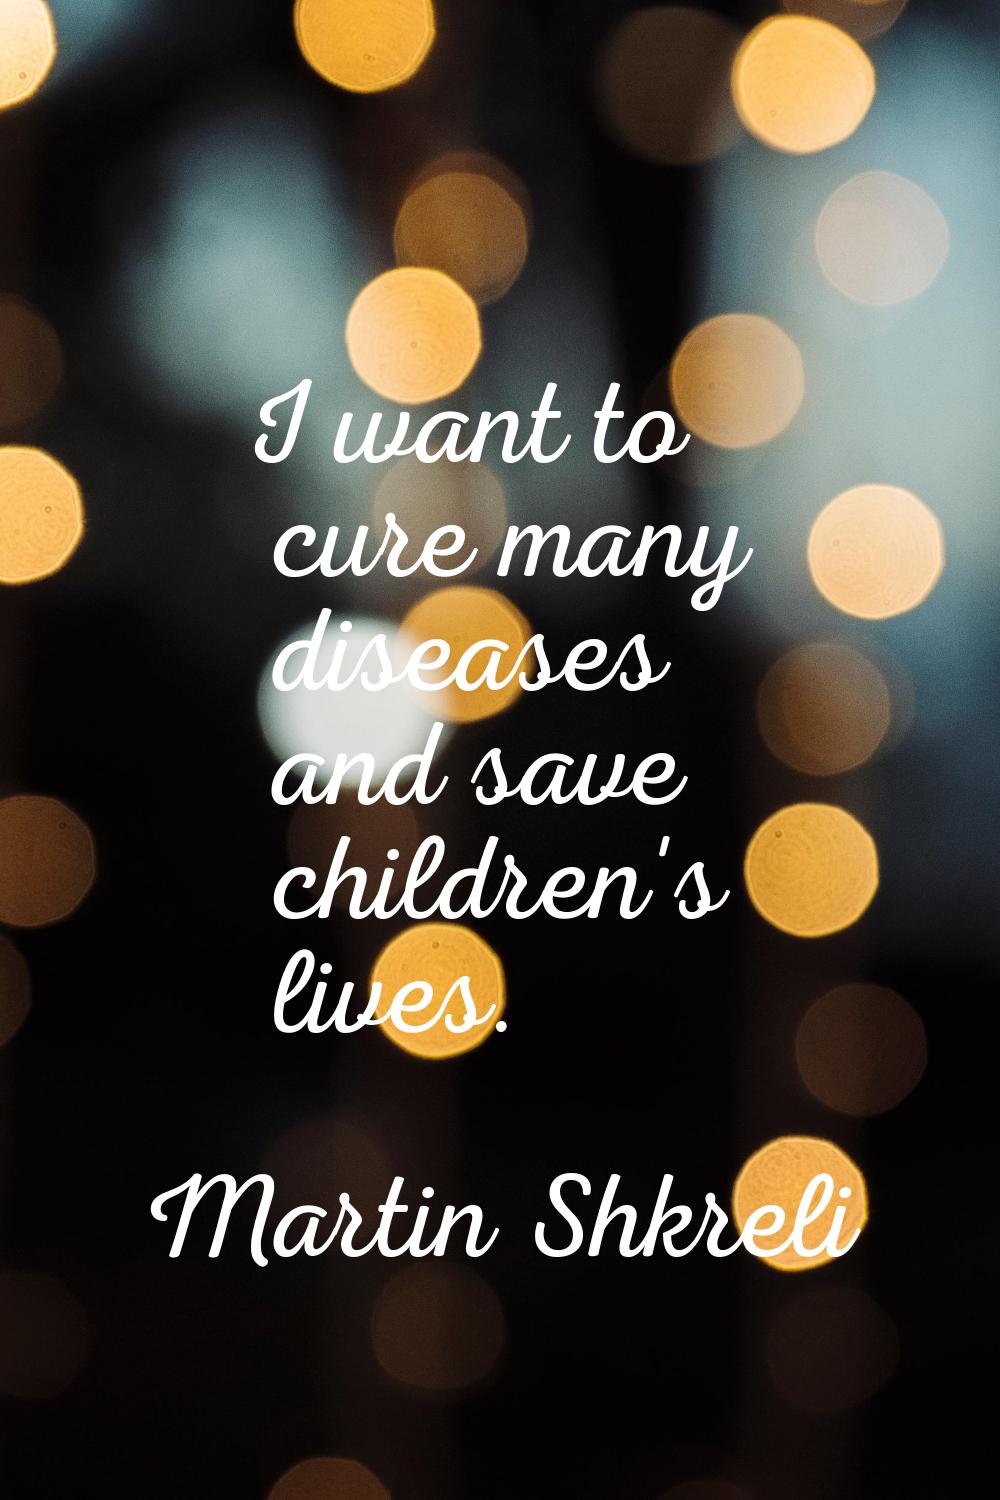 I want to cure many diseases and save children's lives.